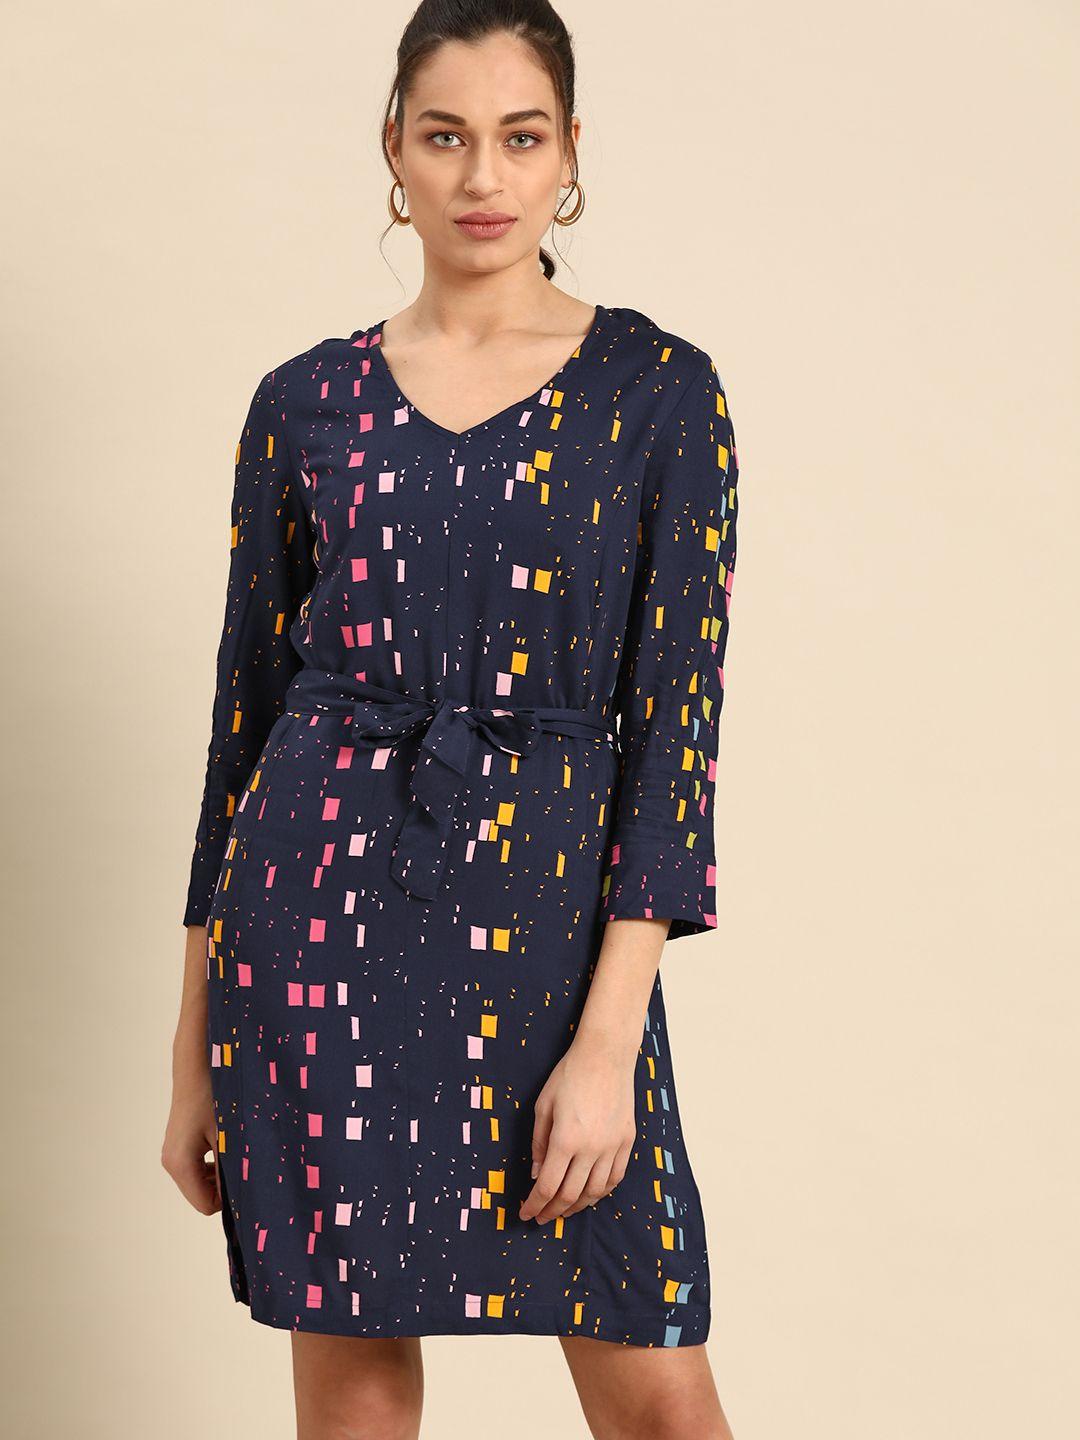 united colors of benetton navy blue & pink printed shift dress with belt